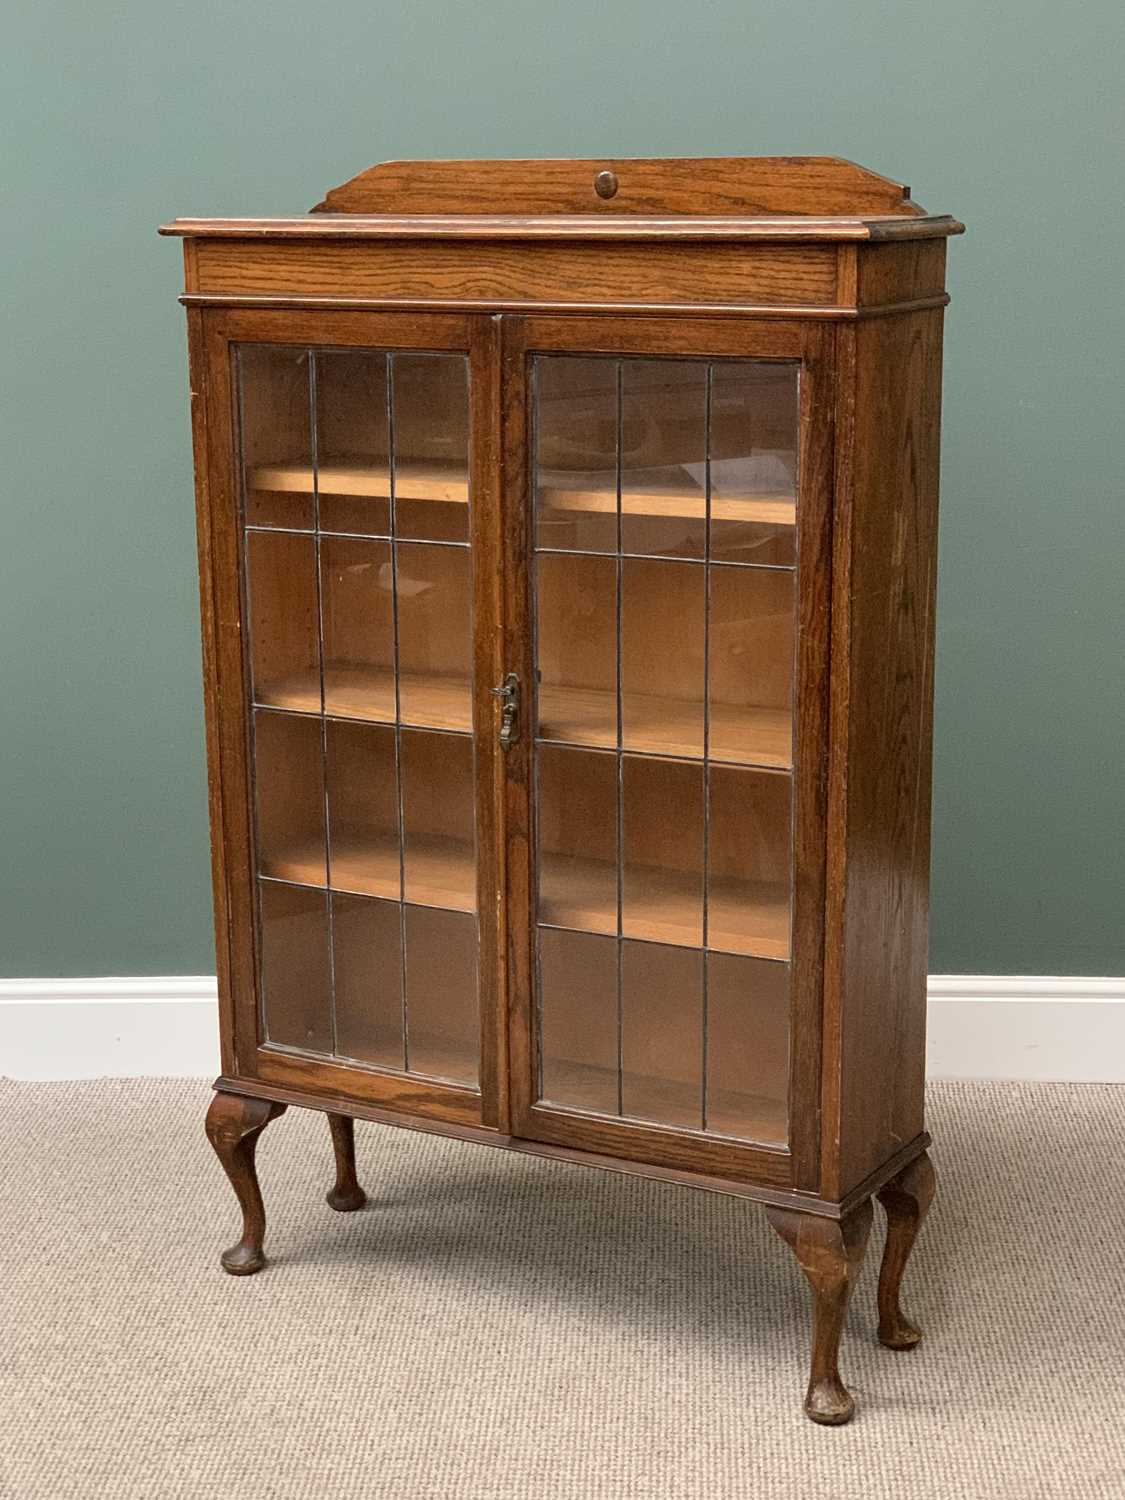 POLISHED OAK BOOKCASE CUPBOARD with railback top, twin leaded glass doors, on queen anne supports,